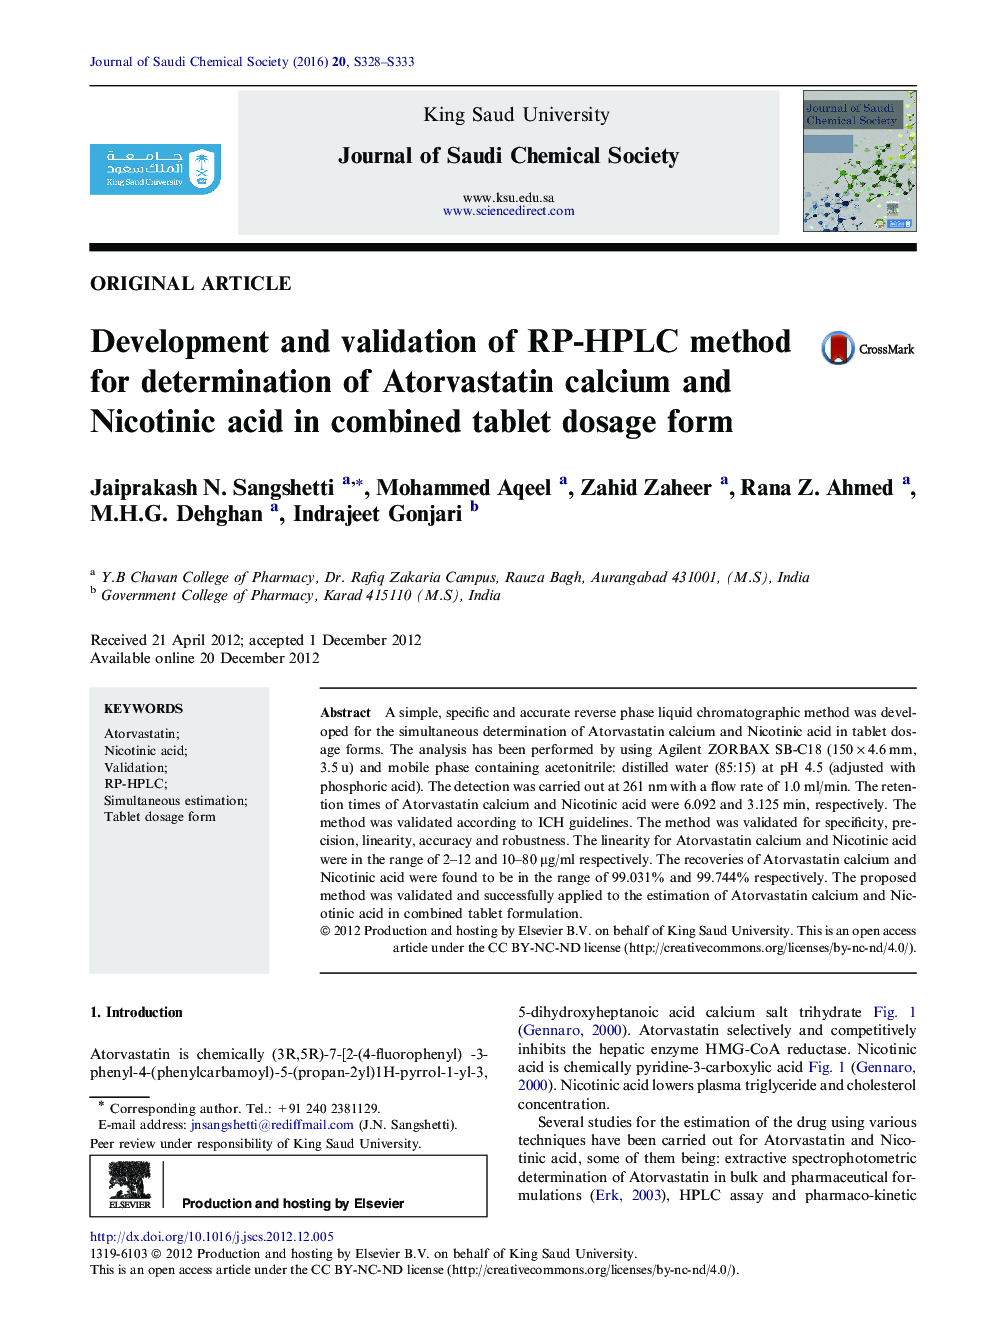 Original articleDevelopment and validation of RP-HPLC method for determination of Atorvastatin calcium and Nicotinic acid in combined tablet dosage form